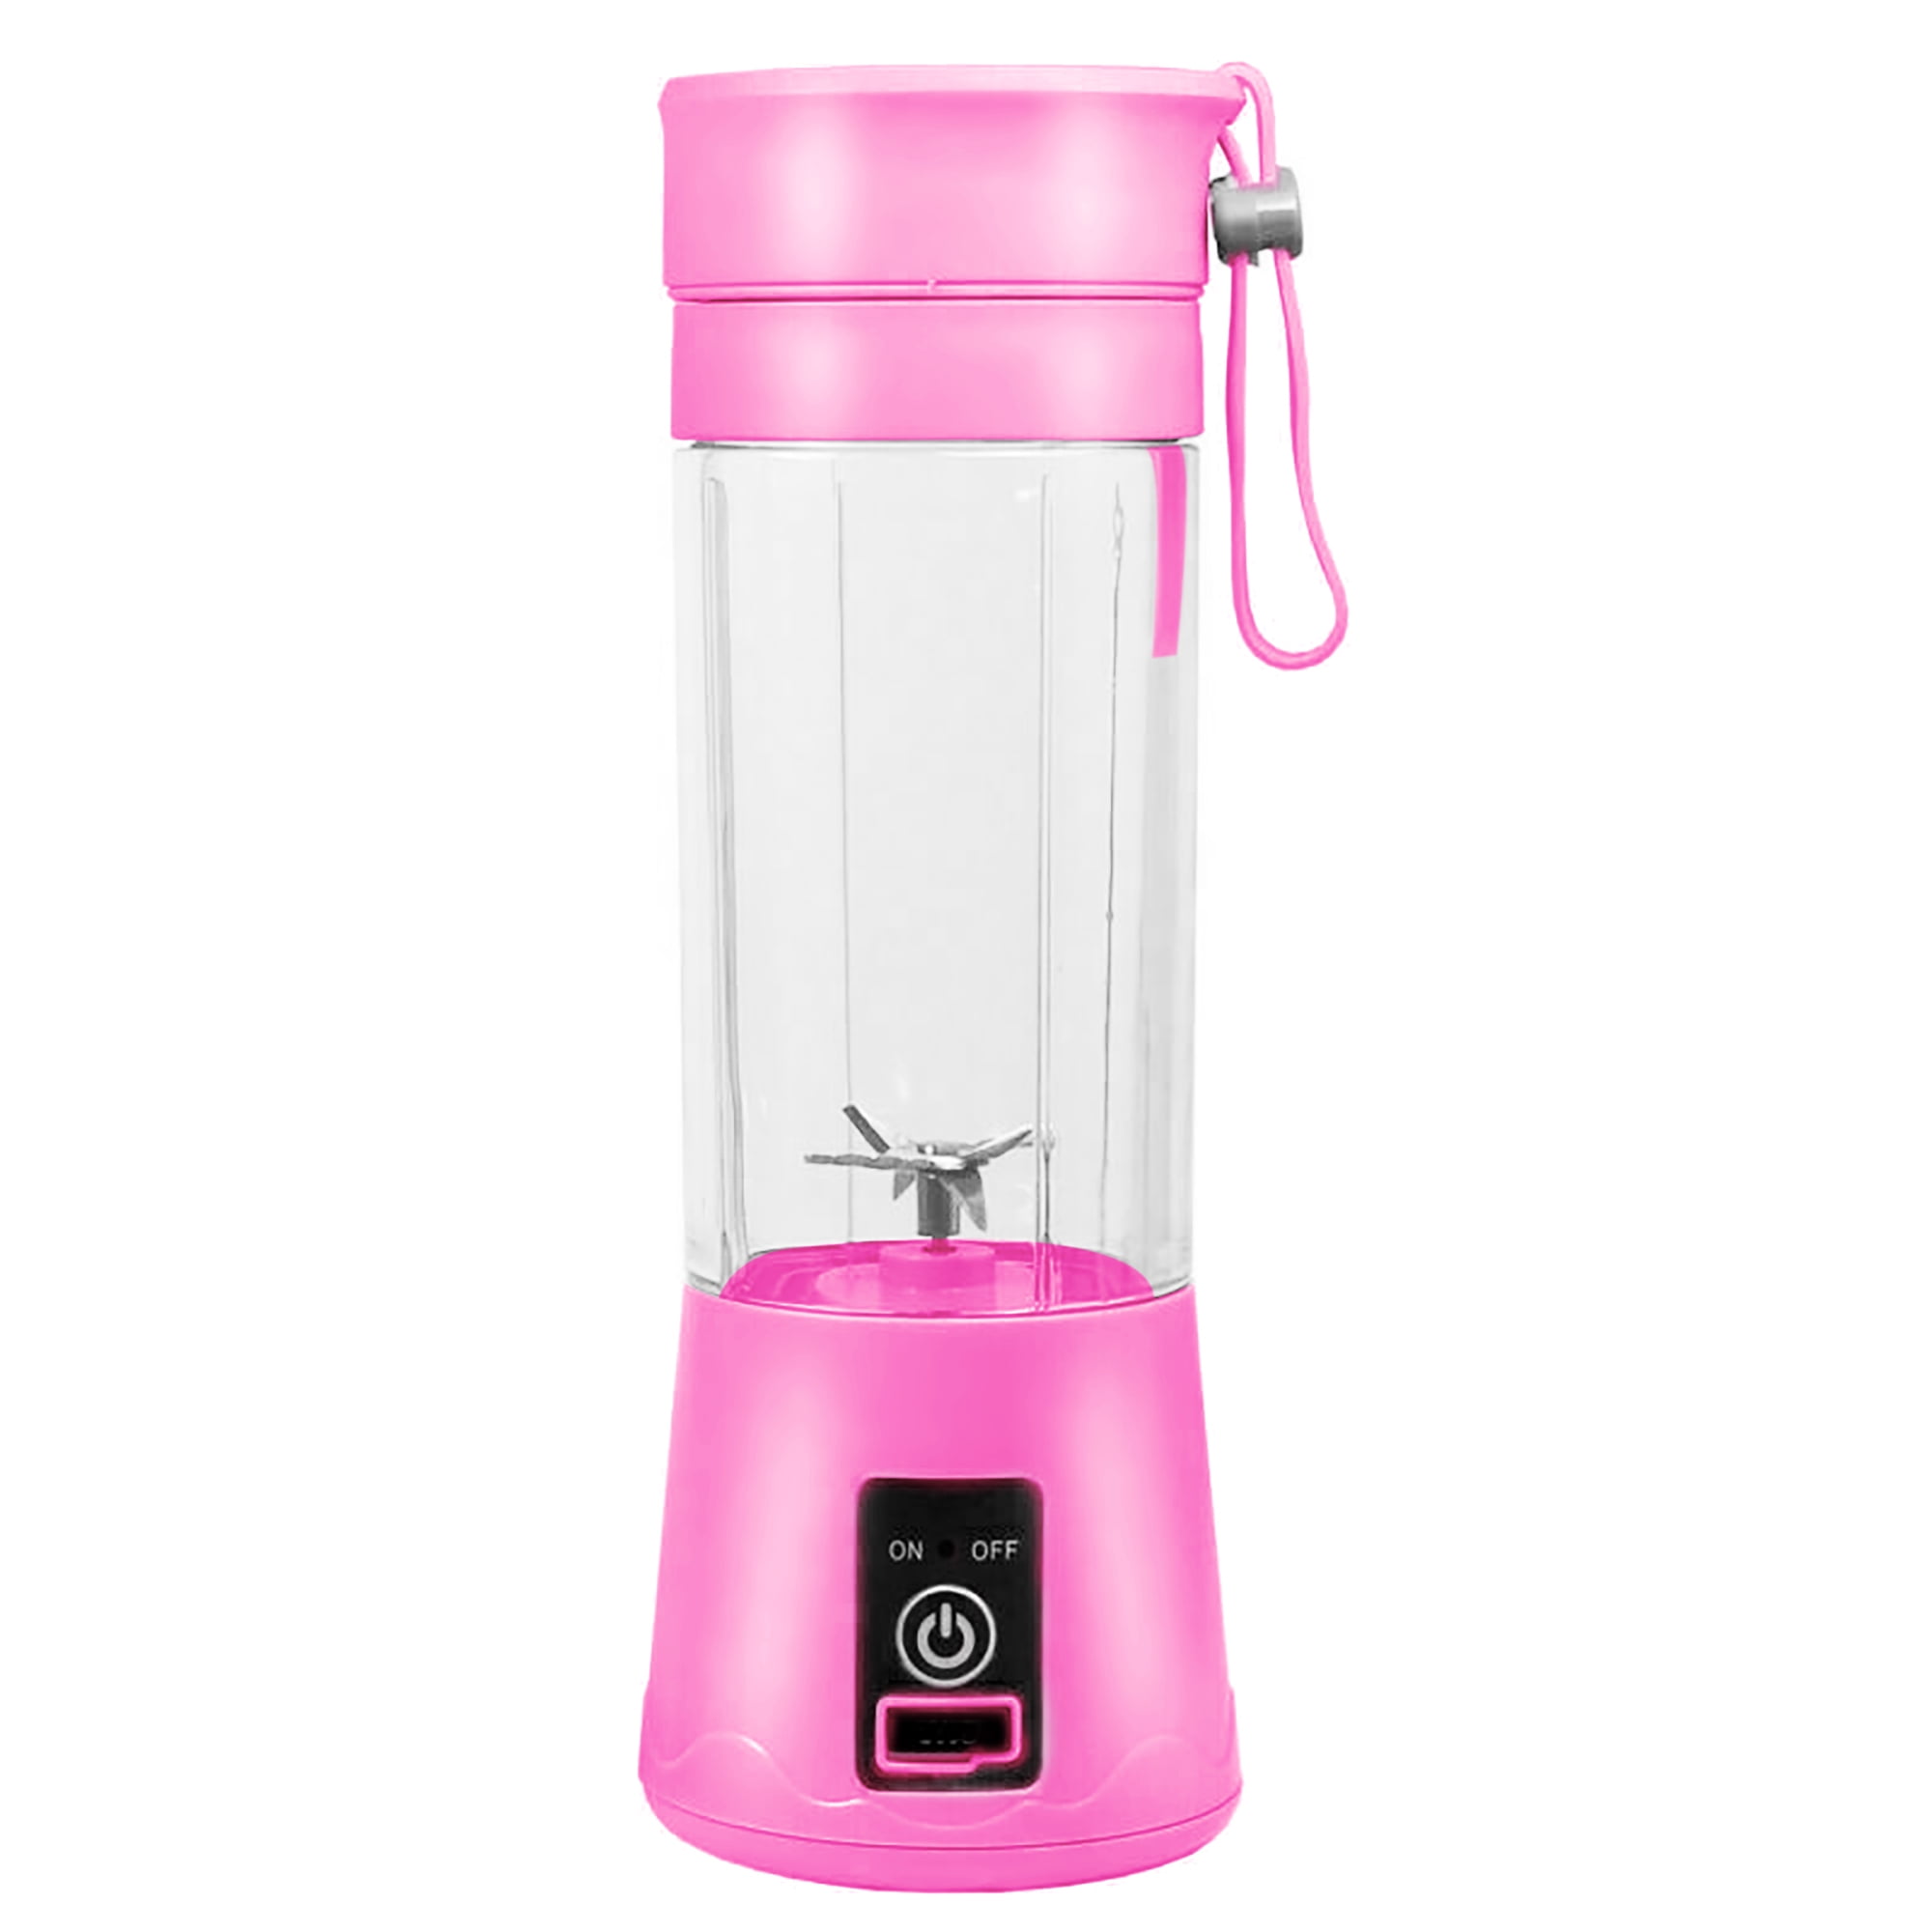 Portable Blender Shakes and Smoothies, Ikristin Personal Juicer Mini Blender, 380ml/13oz Cup, White